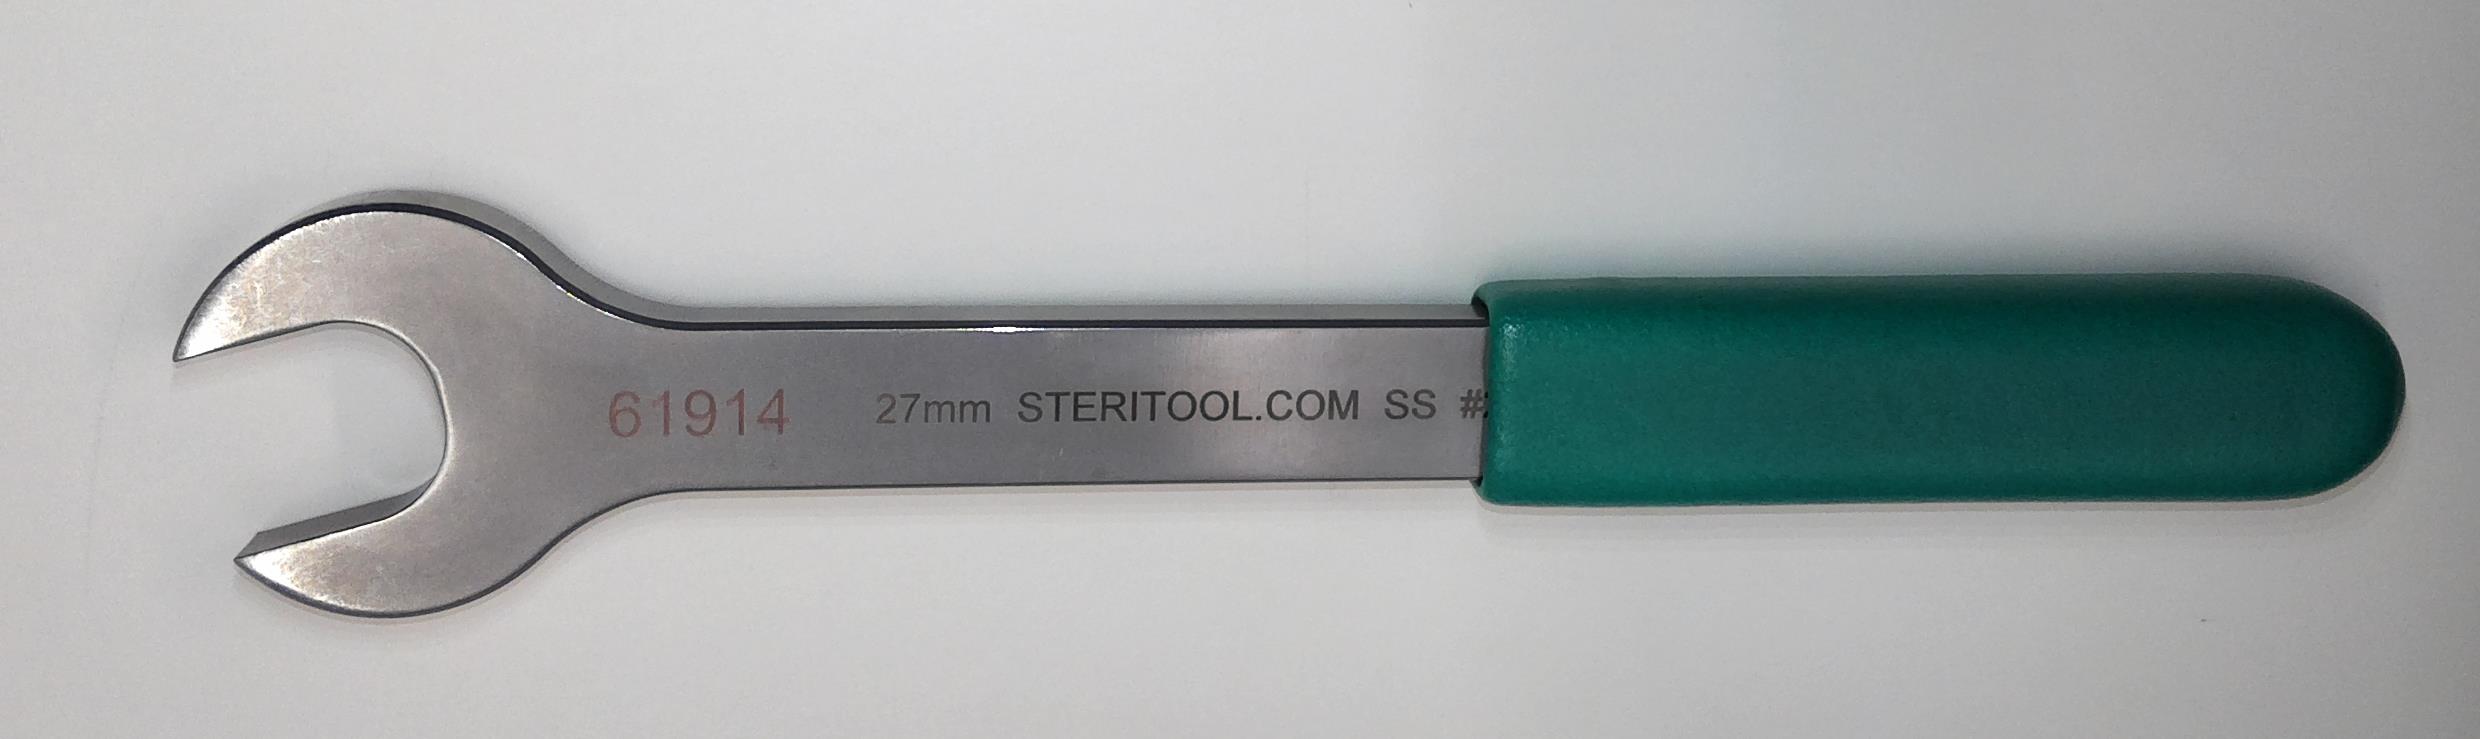 Steritool Autoclavable 20060 27mm Spanner Wrench